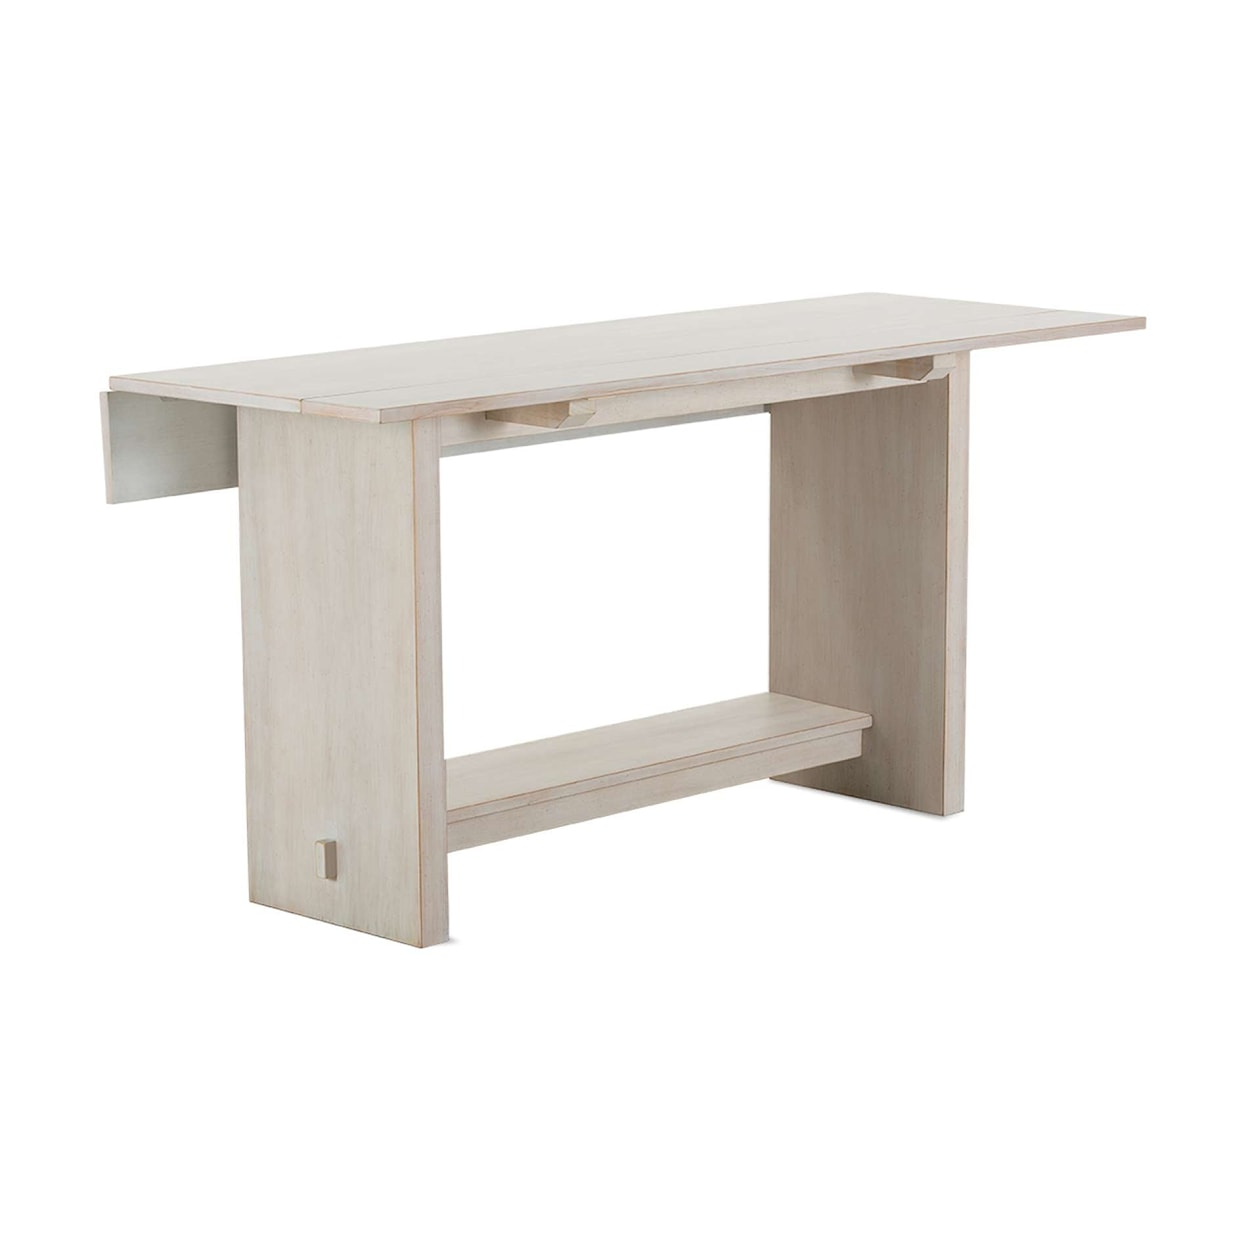 Rowe Concord Console Table